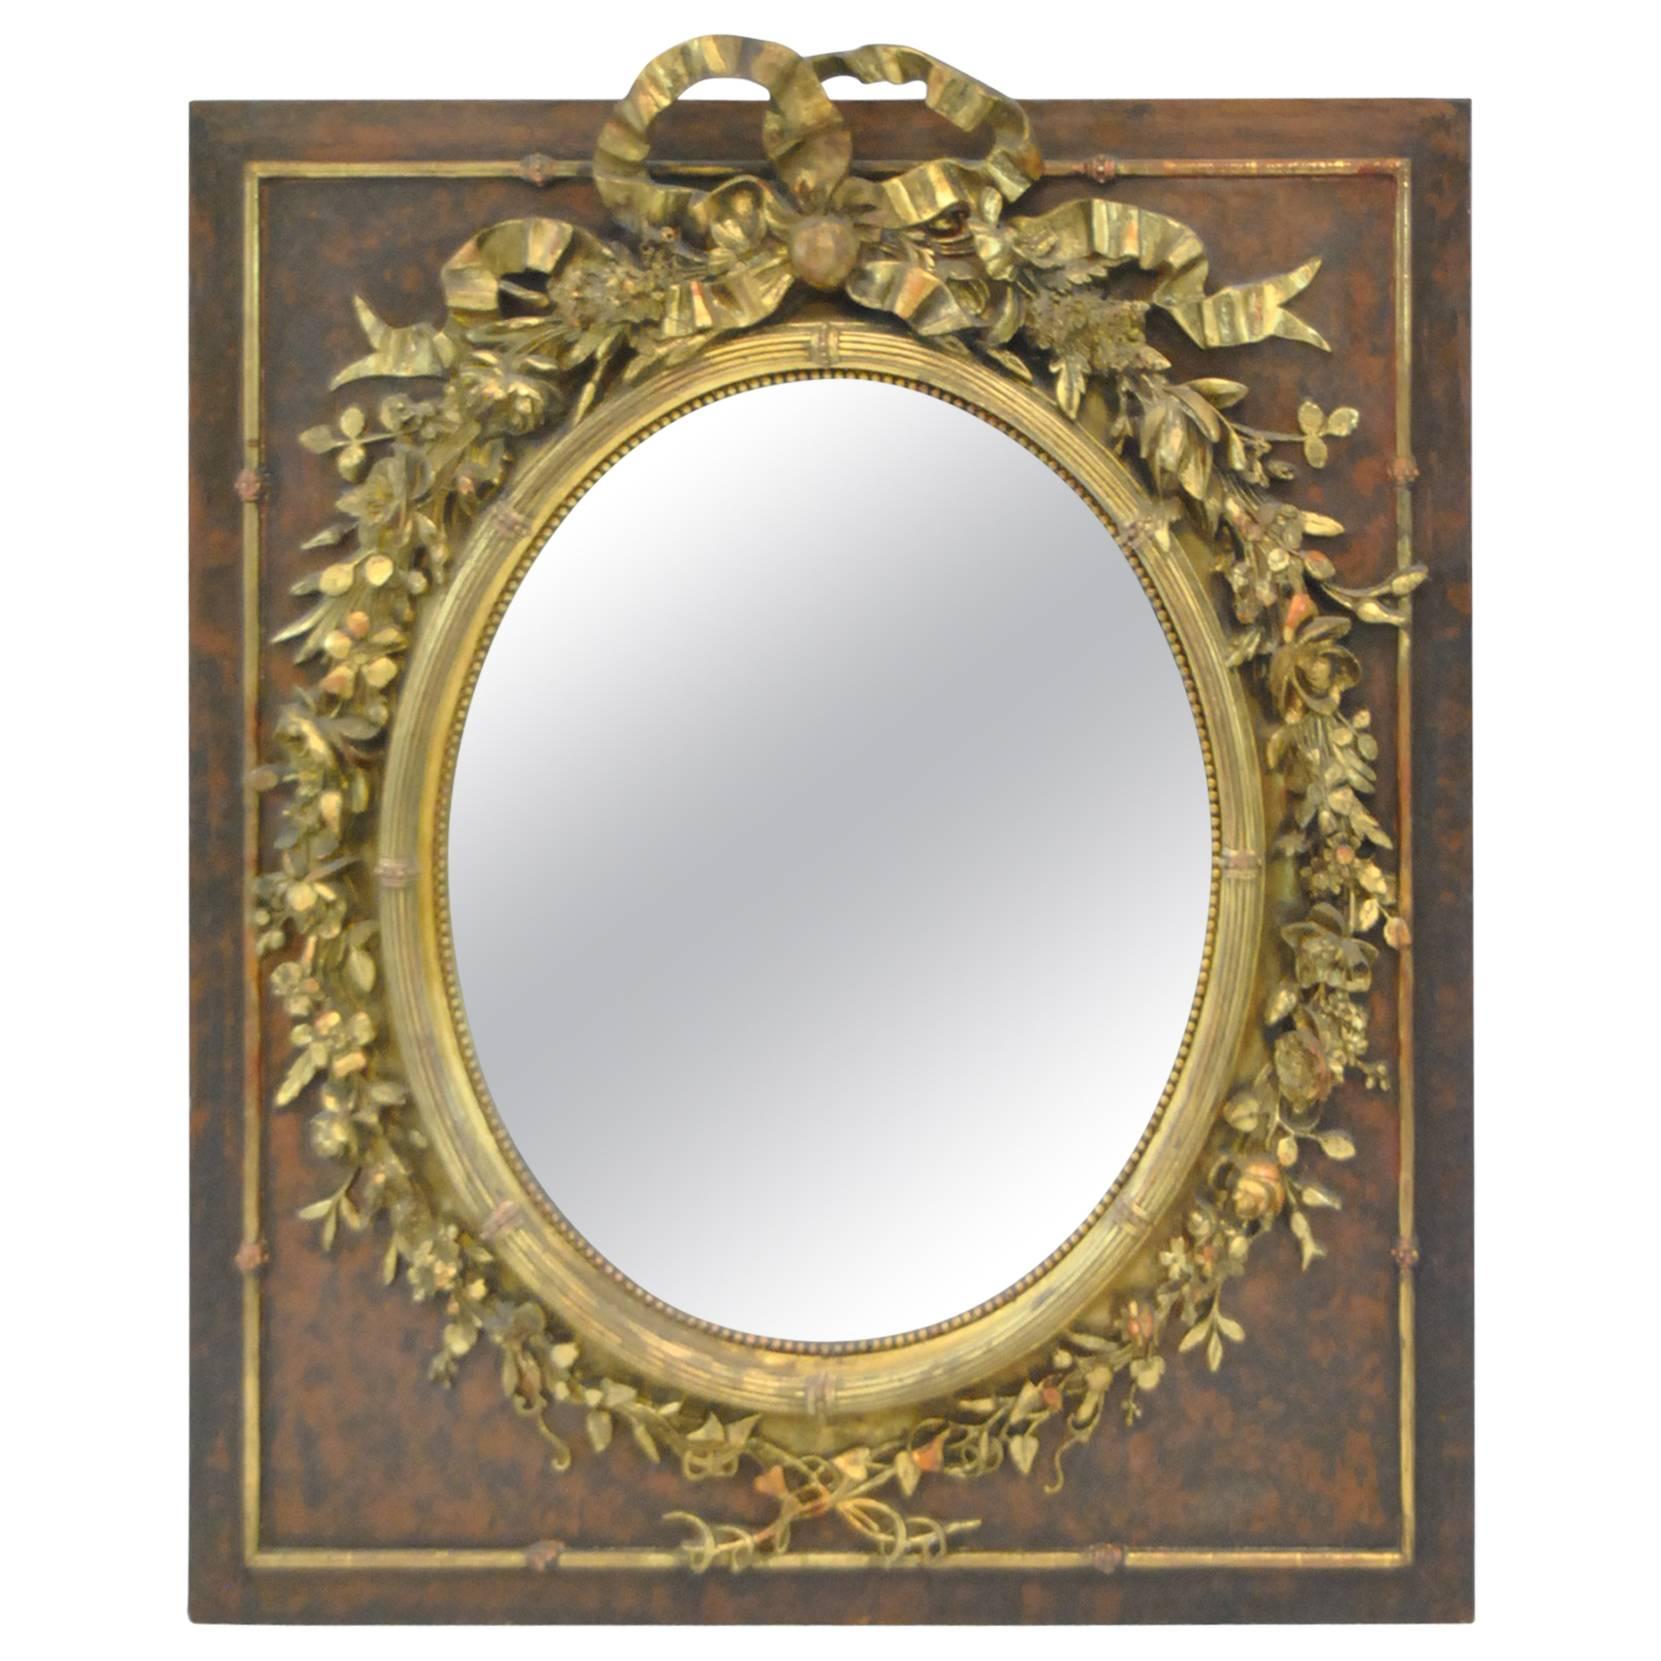 Victorian Oval Mirror with High Relief Floral Detail and Central Bow